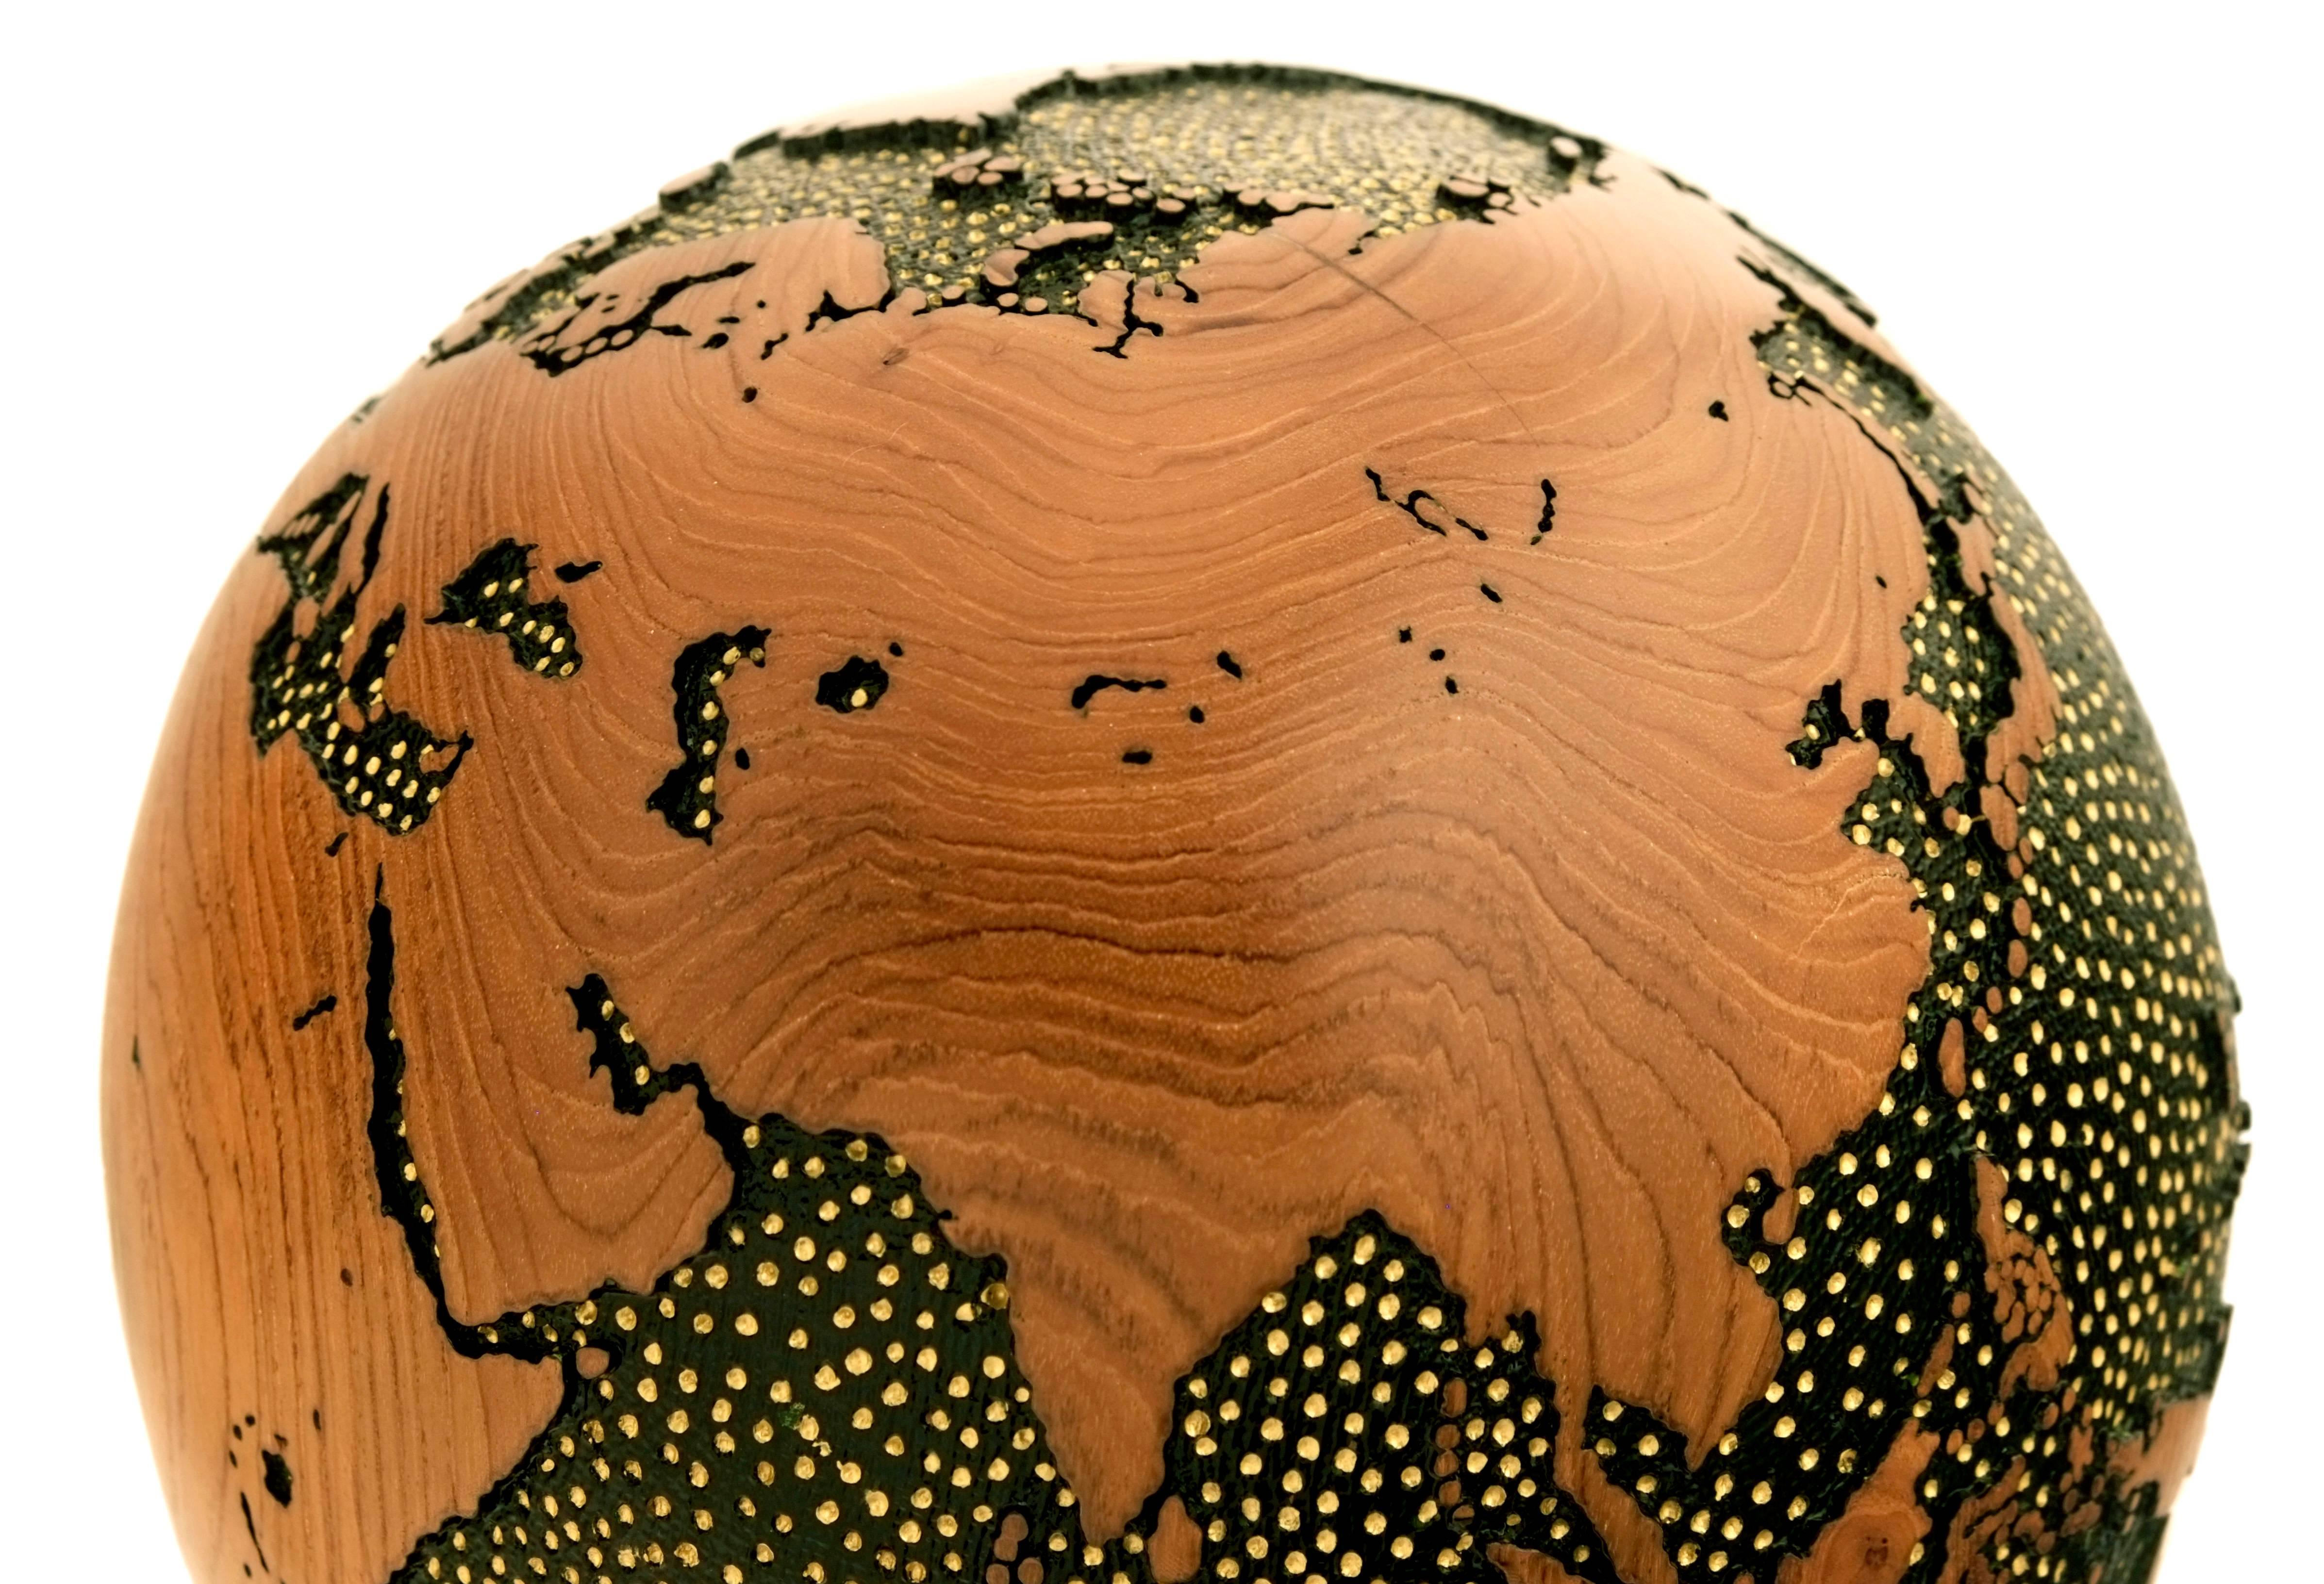 Contemporary Earth Stars Globe, made of teak root, vitrail, gold paint, hammered texture 30cm